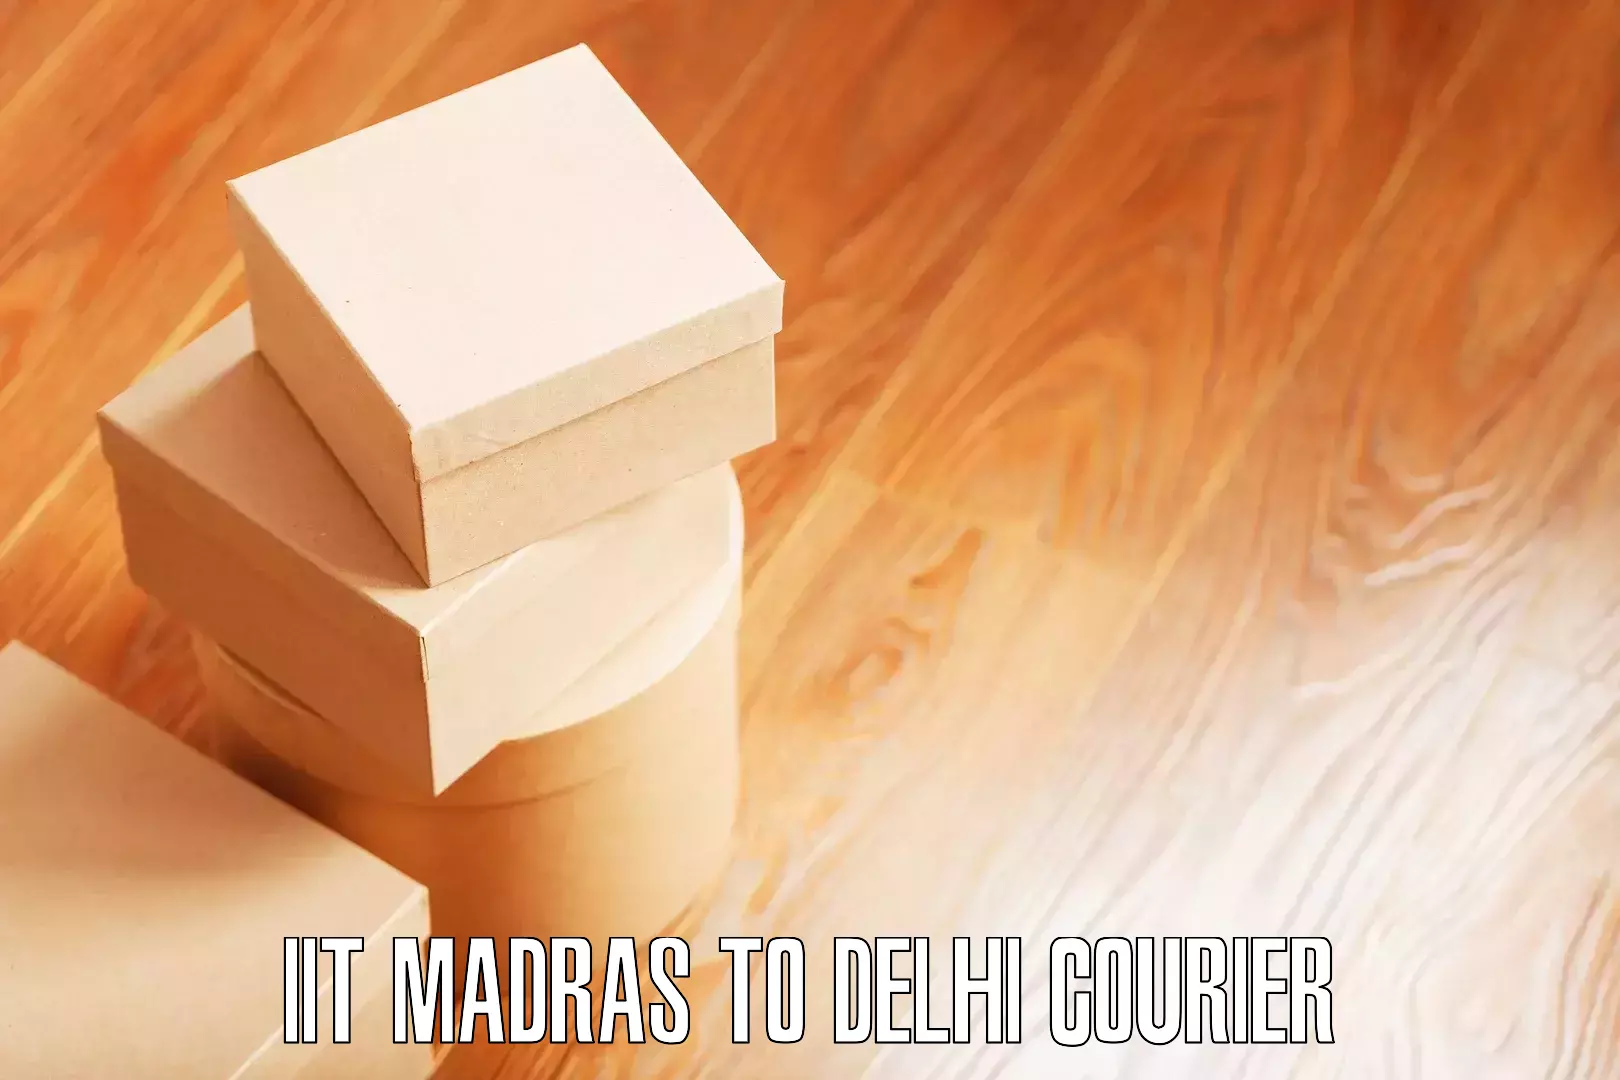 Furniture delivery service IIT Madras to Indraprastha